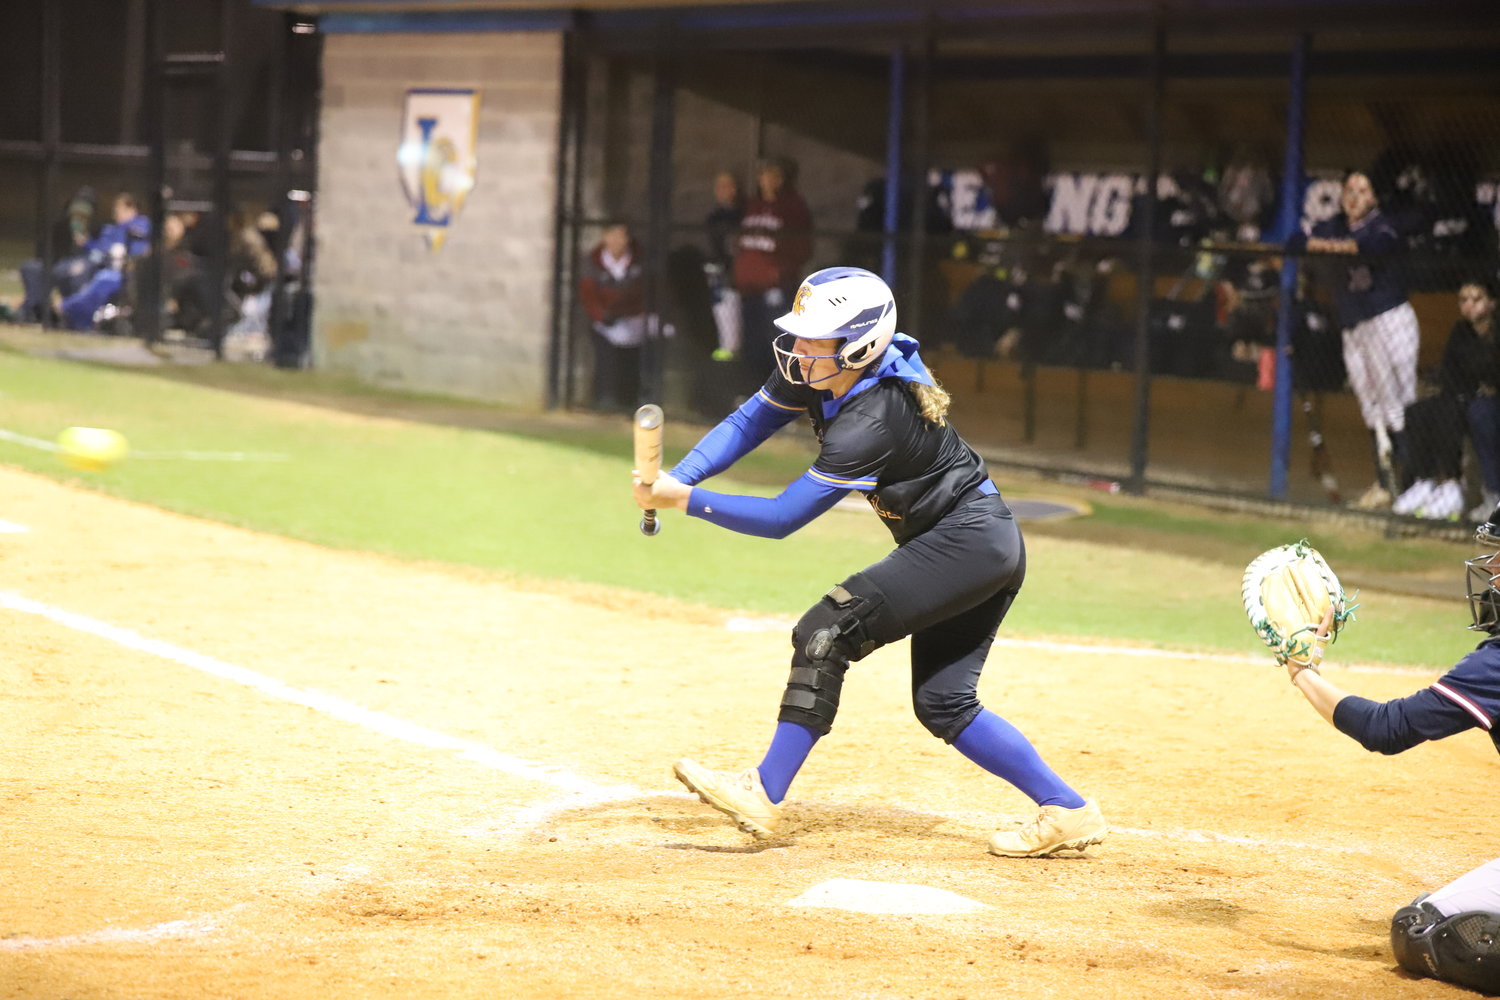 Lexington's Madison Rogers with the bunt.